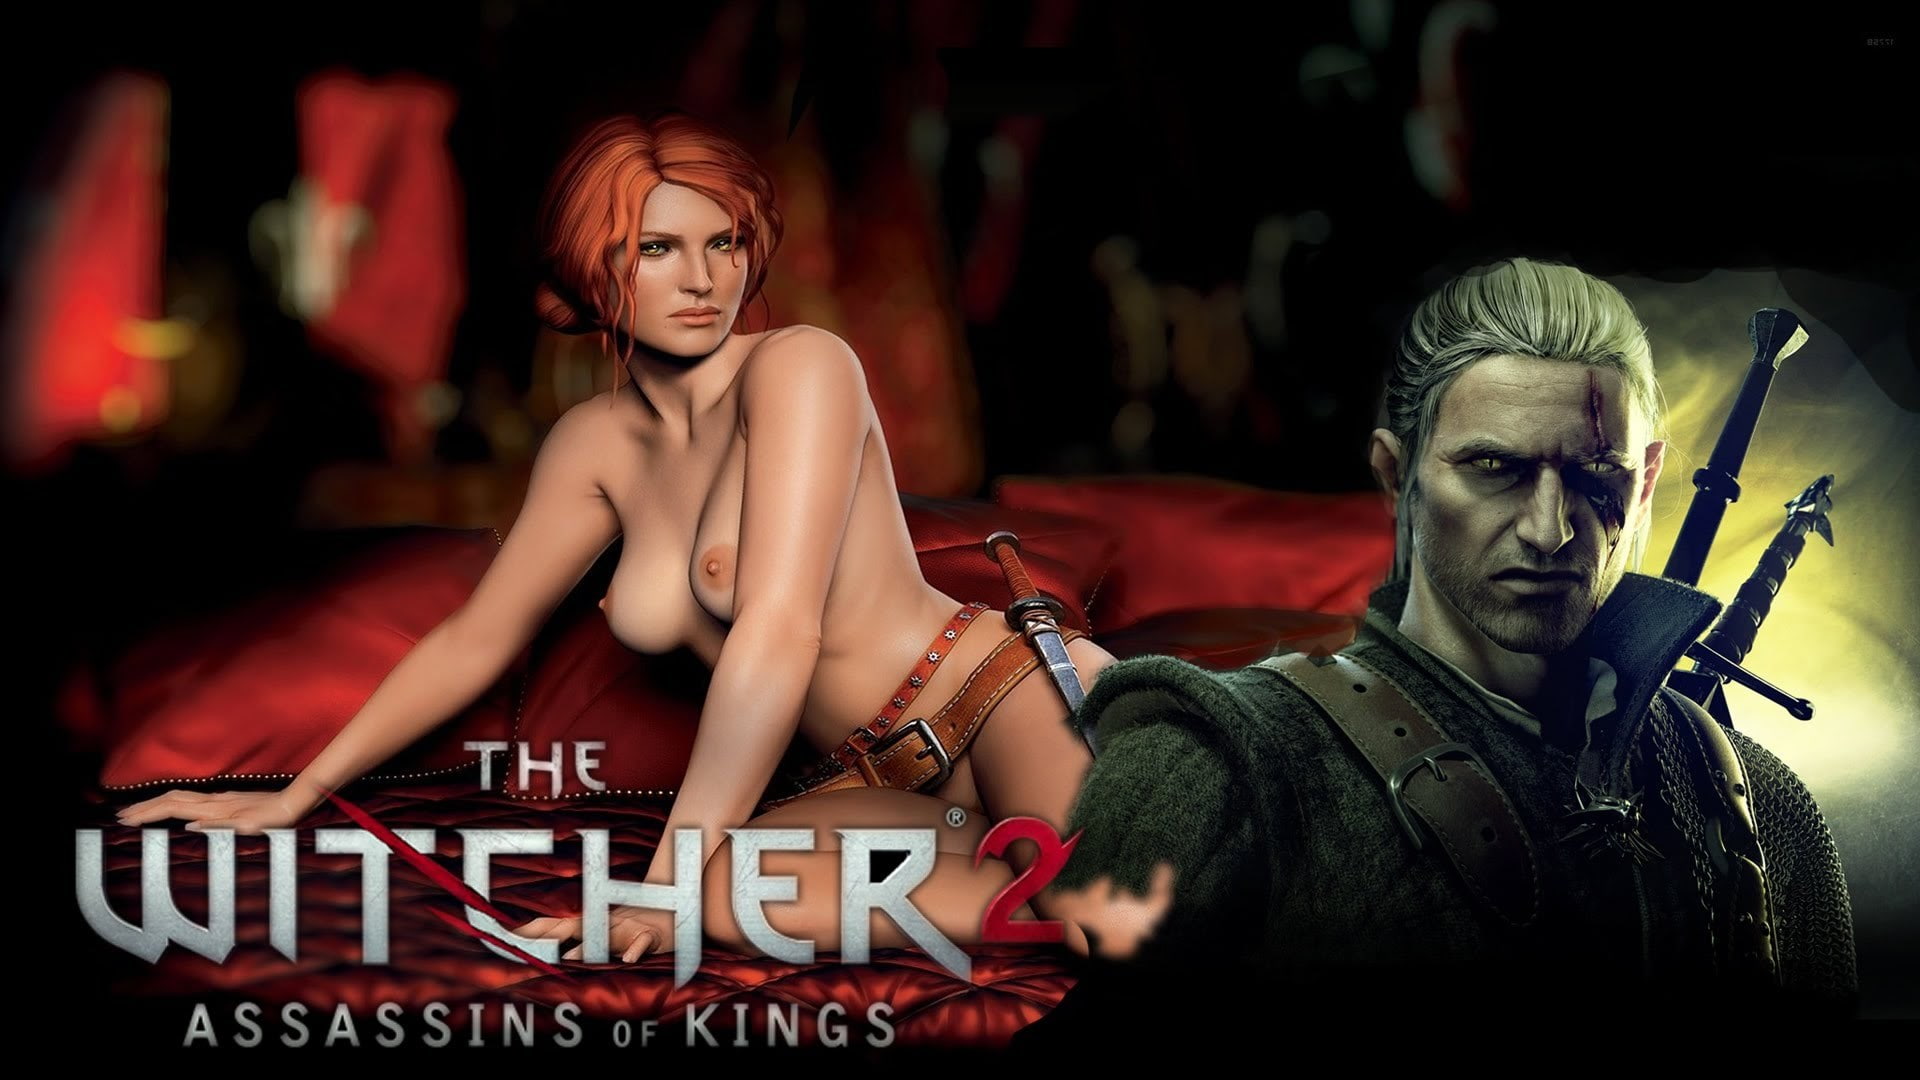 The Witcher 2: Assassins of Kings, arts culture and entertainment